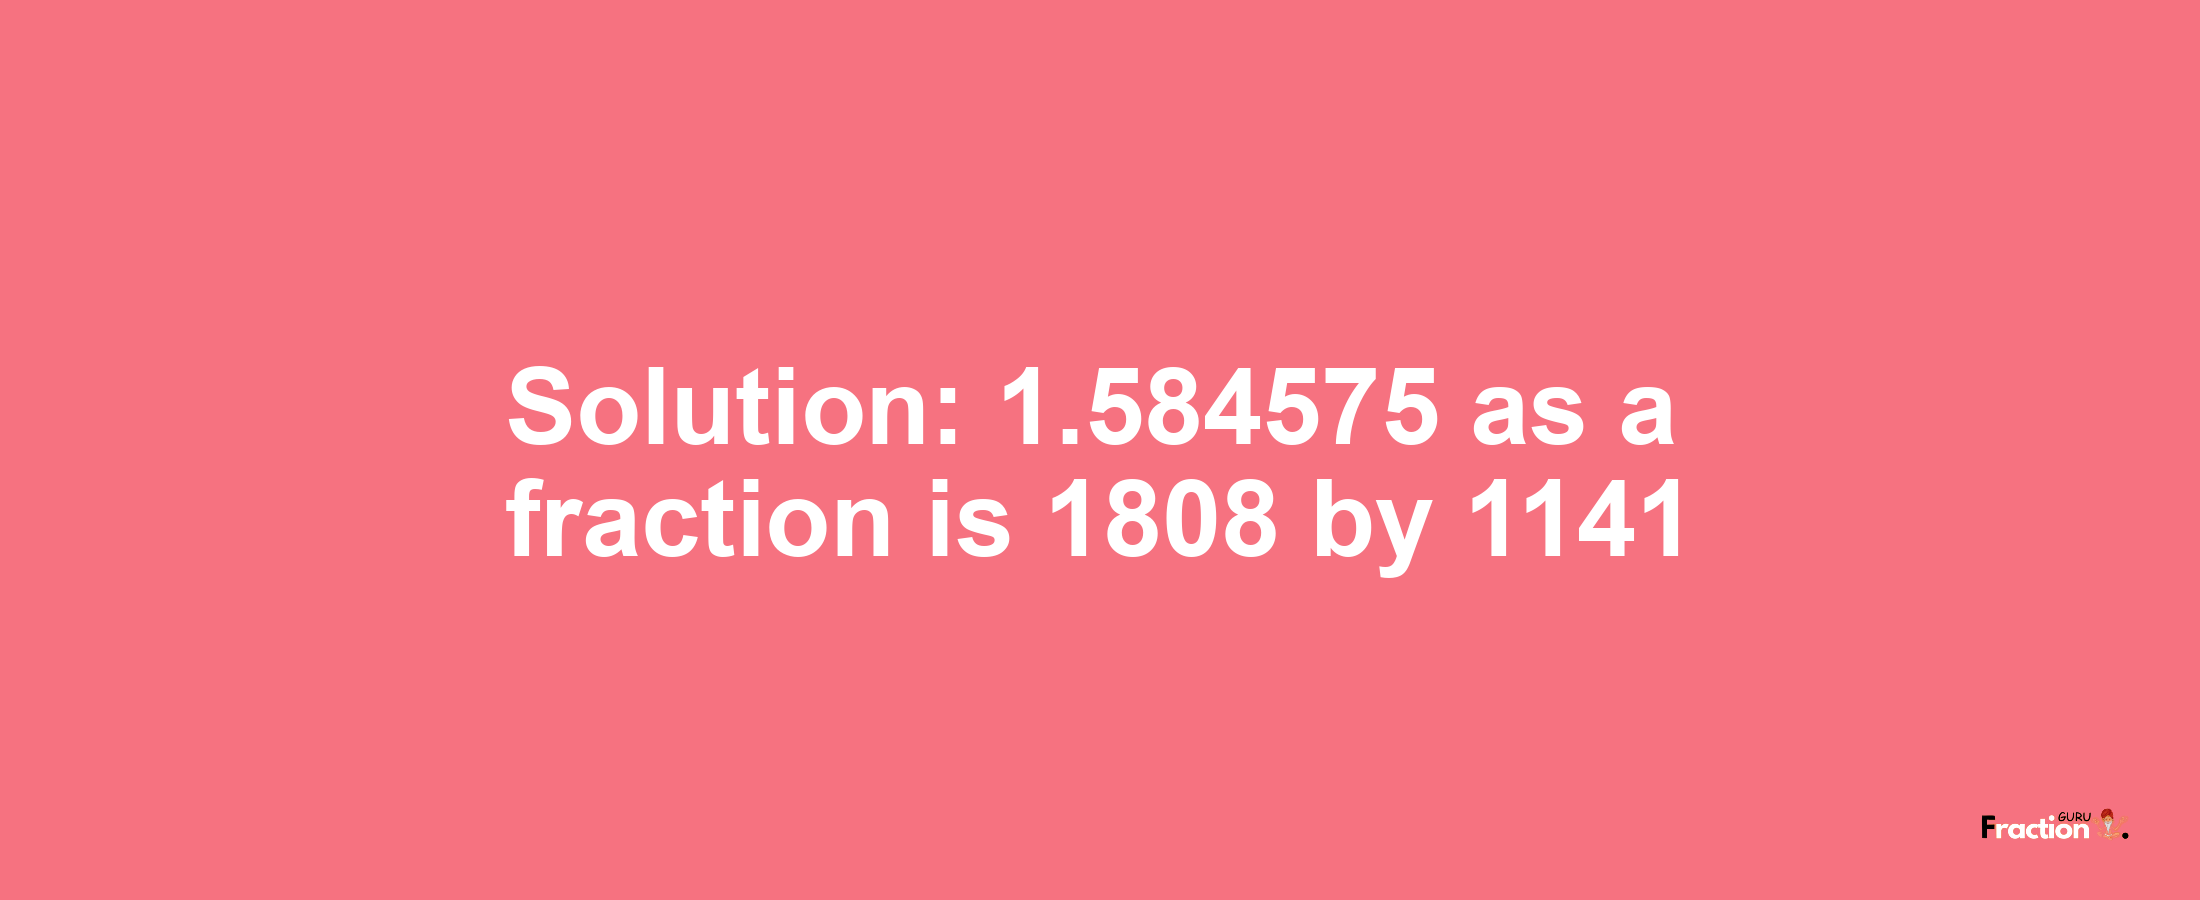 Solution:1.584575 as a fraction is 1808/1141